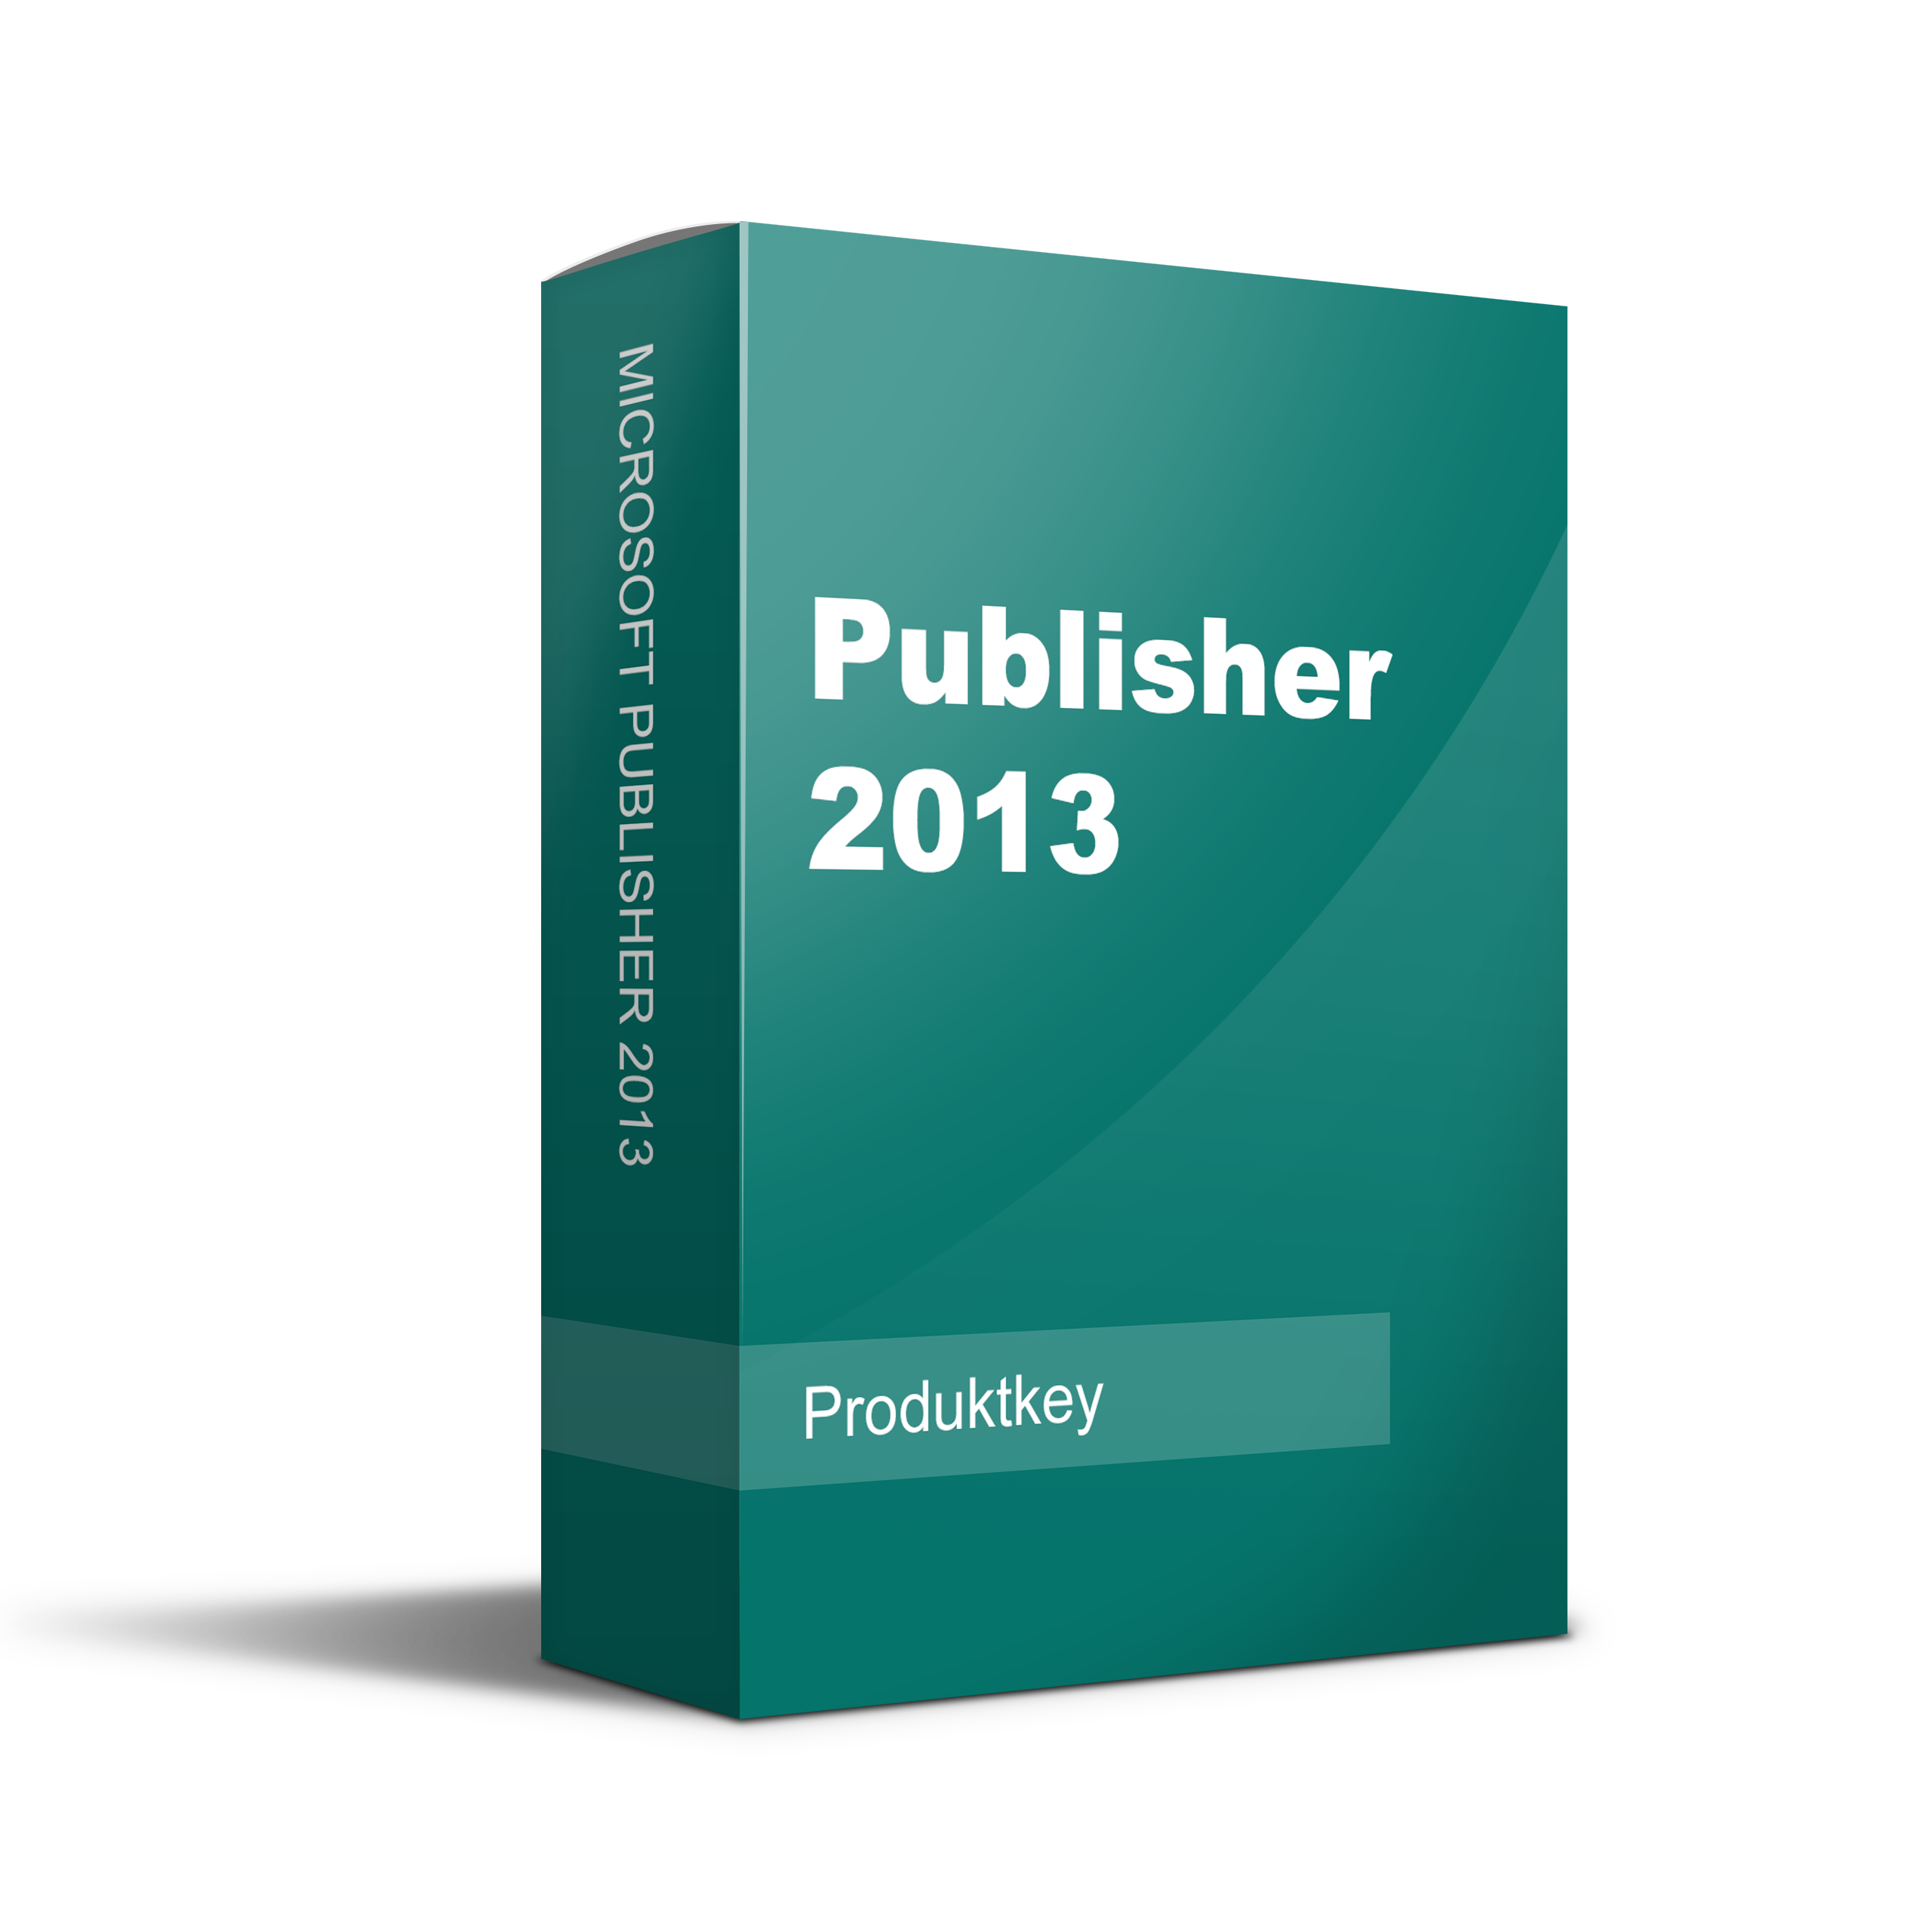 microsoft publisher 2013 free download full version